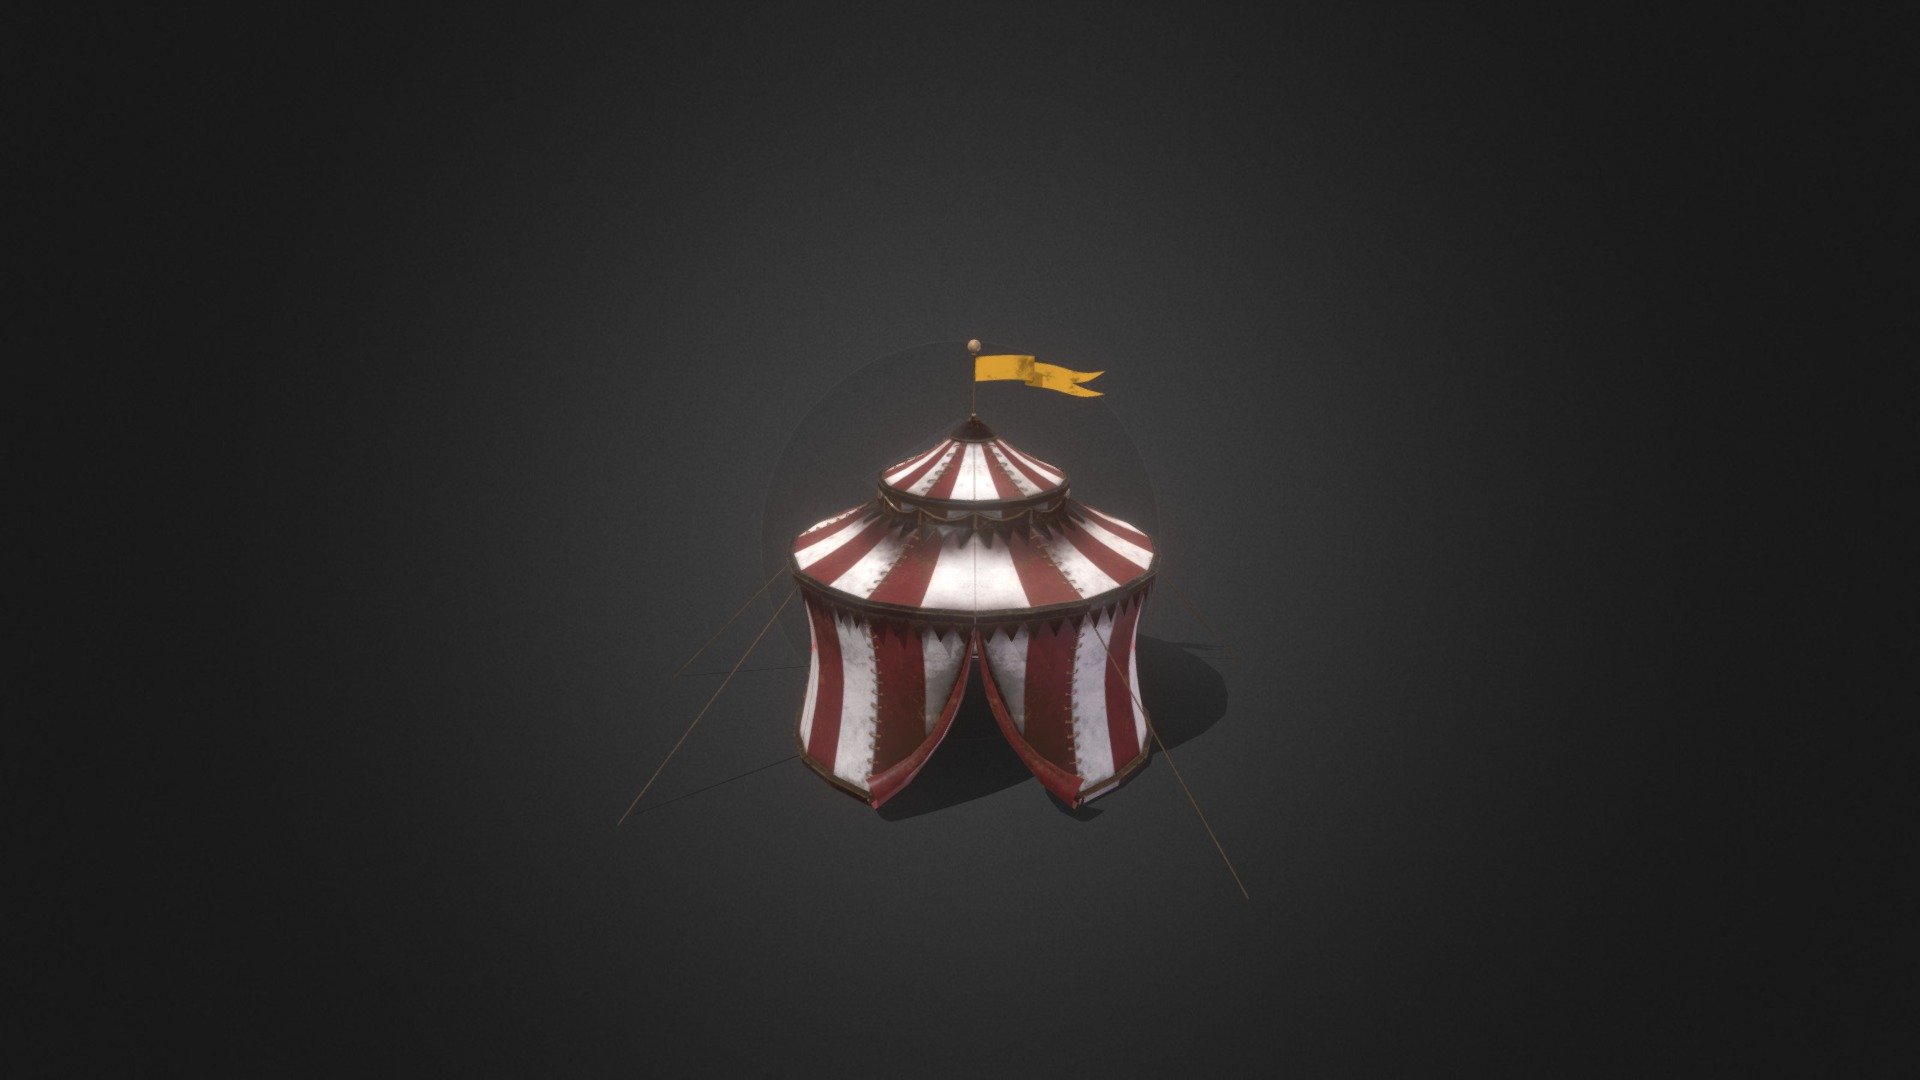 Low poly Cirkus tent

With semi-realisitc textures. It should be ready to be used in games, if not; Let me know and I will re-upload. Feel free to use 3d model